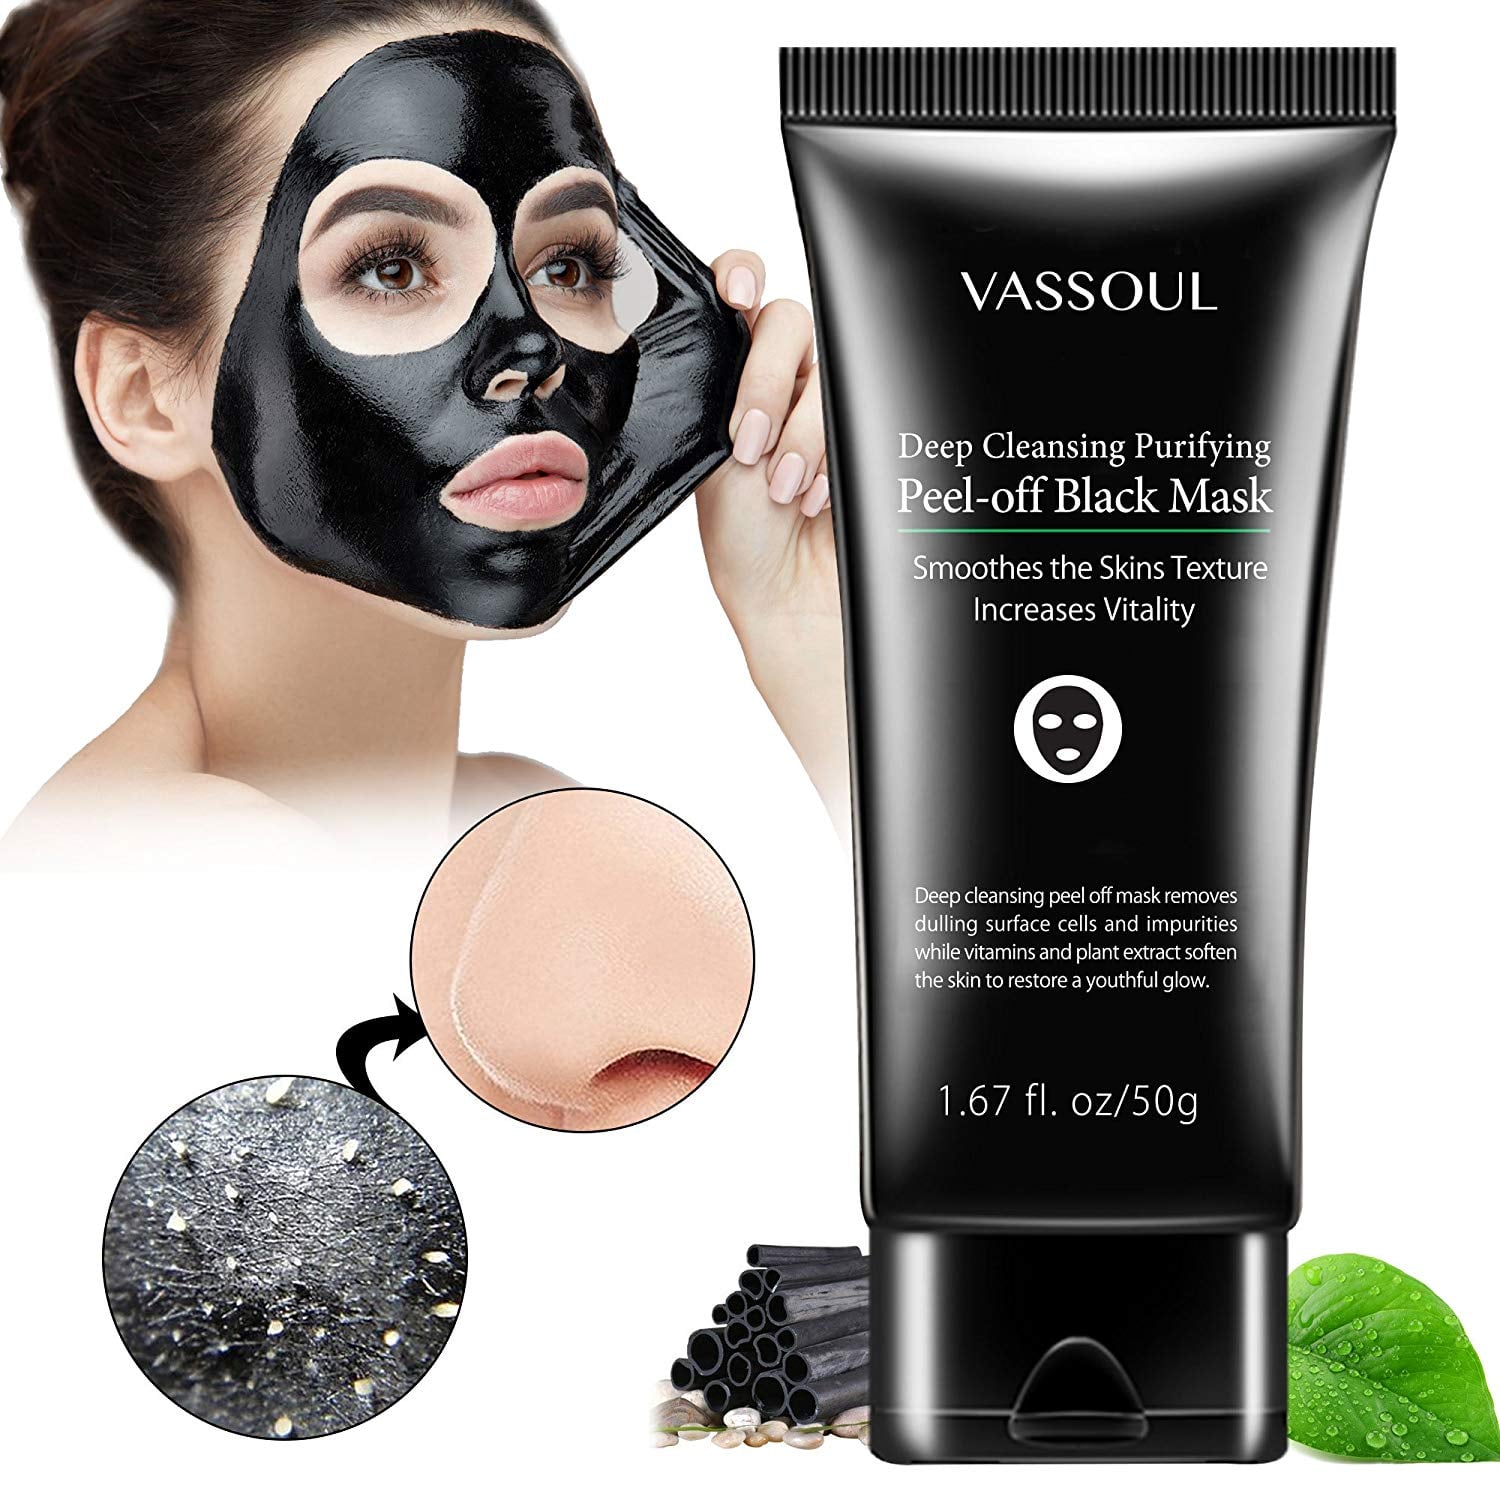 Vassoul Blackhead Remover Mask I Test Products For Work And These Are The 9 Best Skincare Items I Ve Bought On Amazon Popsugar Beauty Photo 5